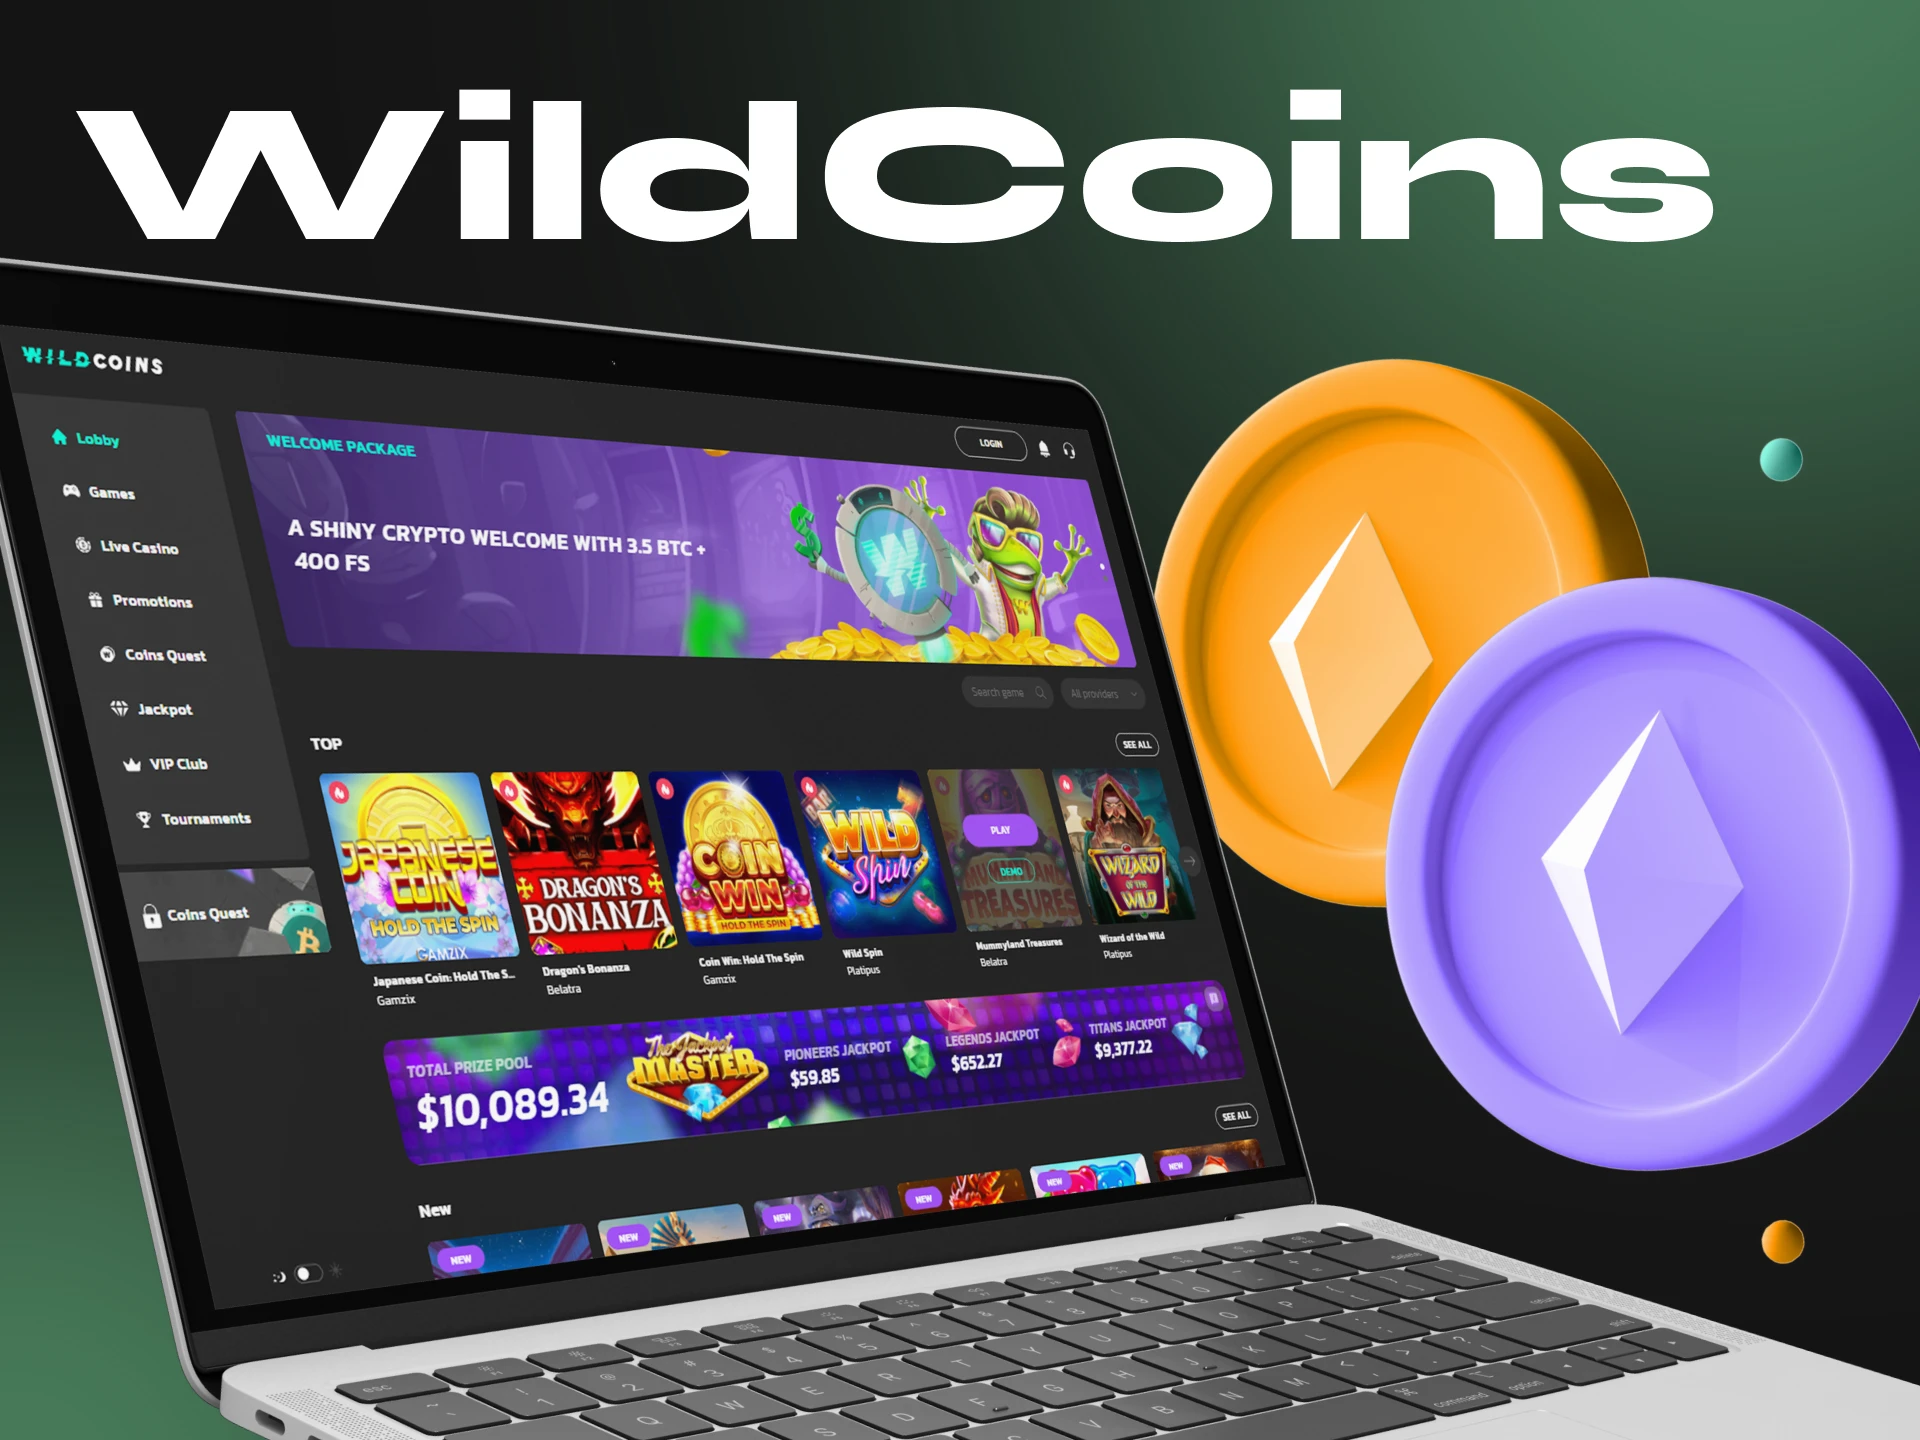 Try playing casino games on WildCoins.